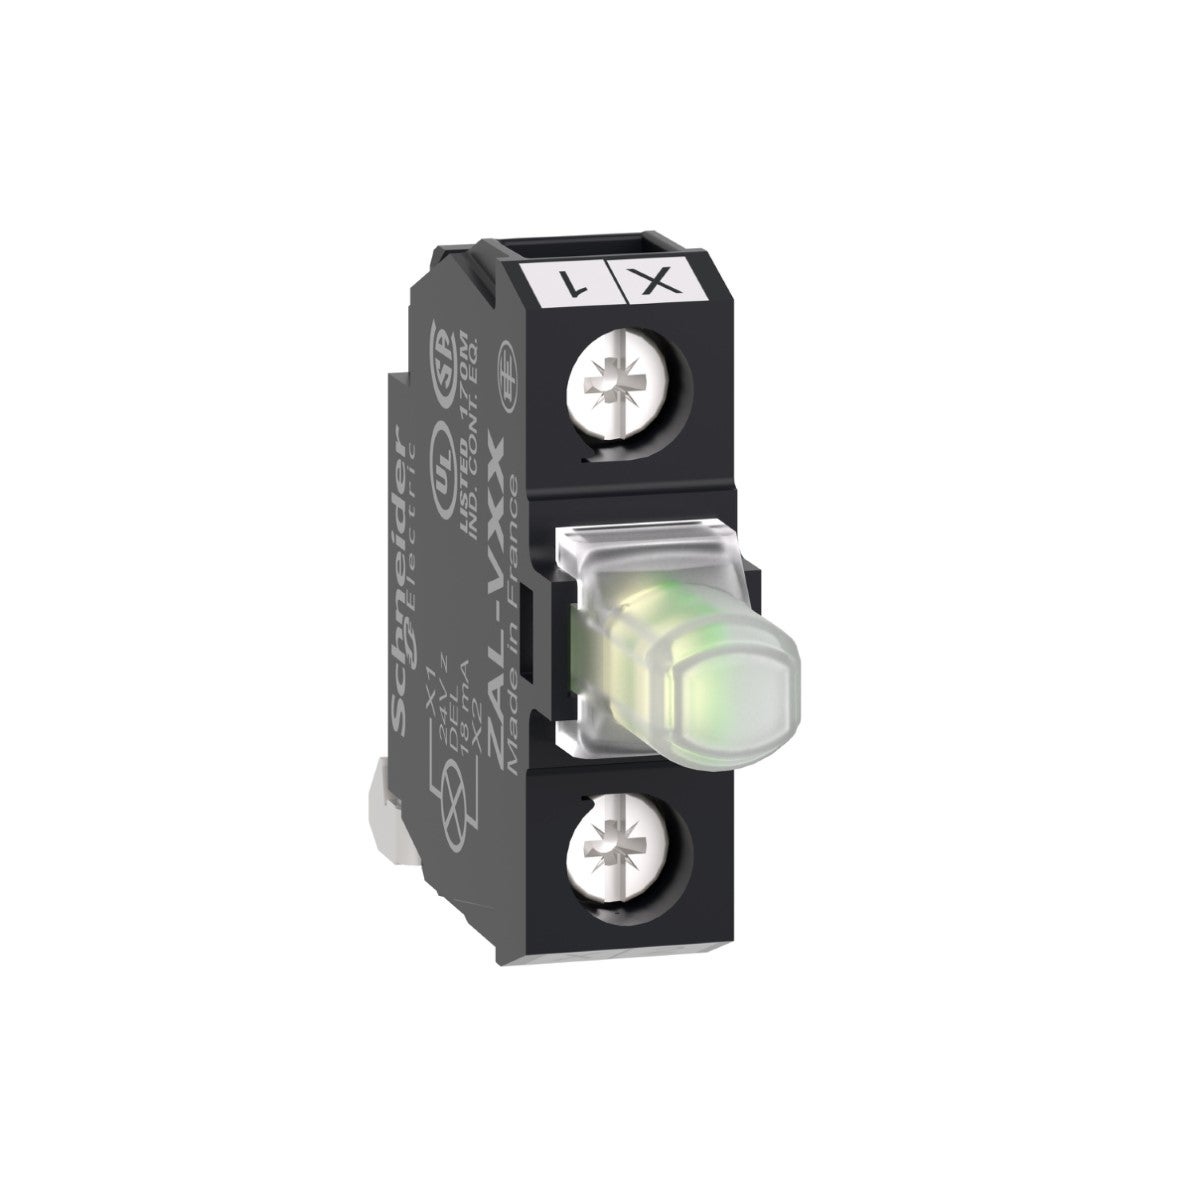 Light block, Harmony XALD, XALK, for head 22mm, universal LED, mounting in back of enclosure, 230…240V  AC DC